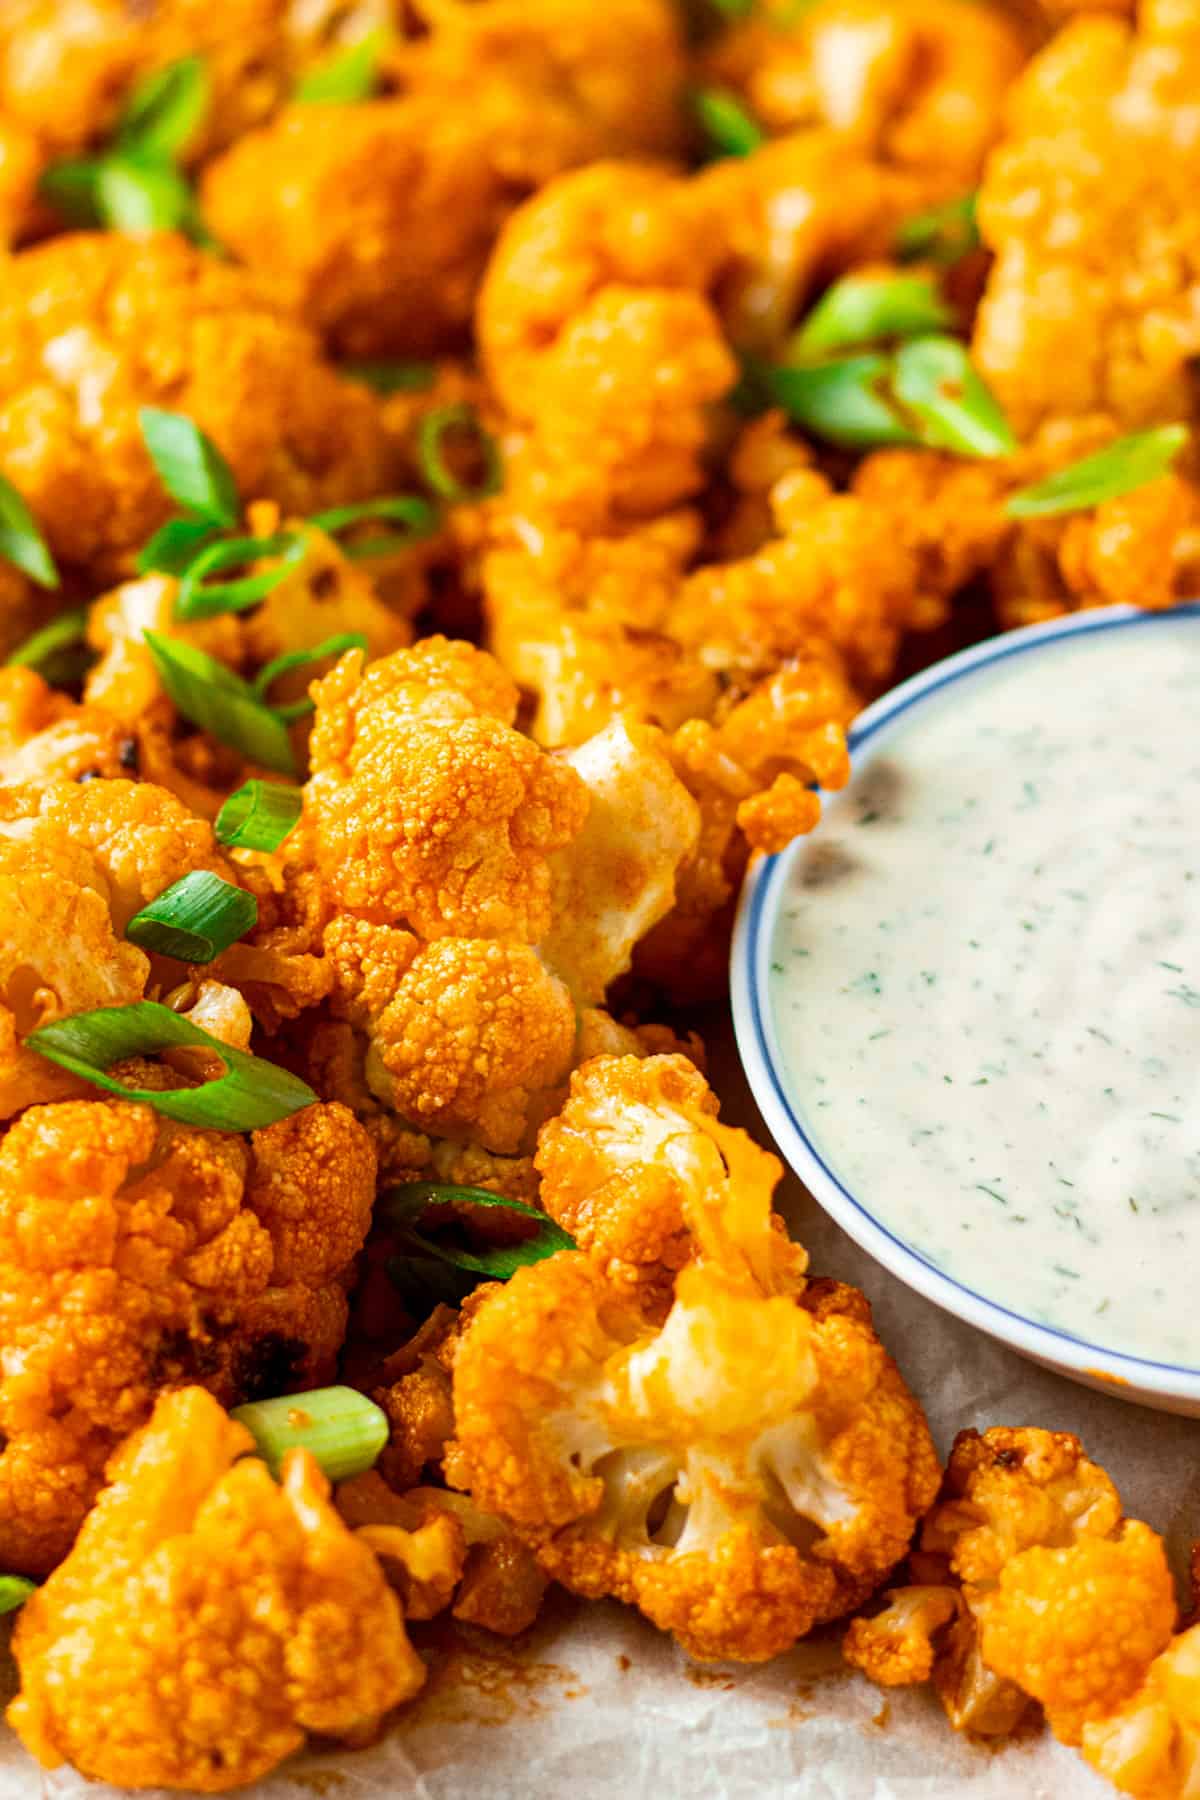 Close up of roasted buffalo cauliflower garnished with sliced green onions and a bowl of ranch dipping sauce.